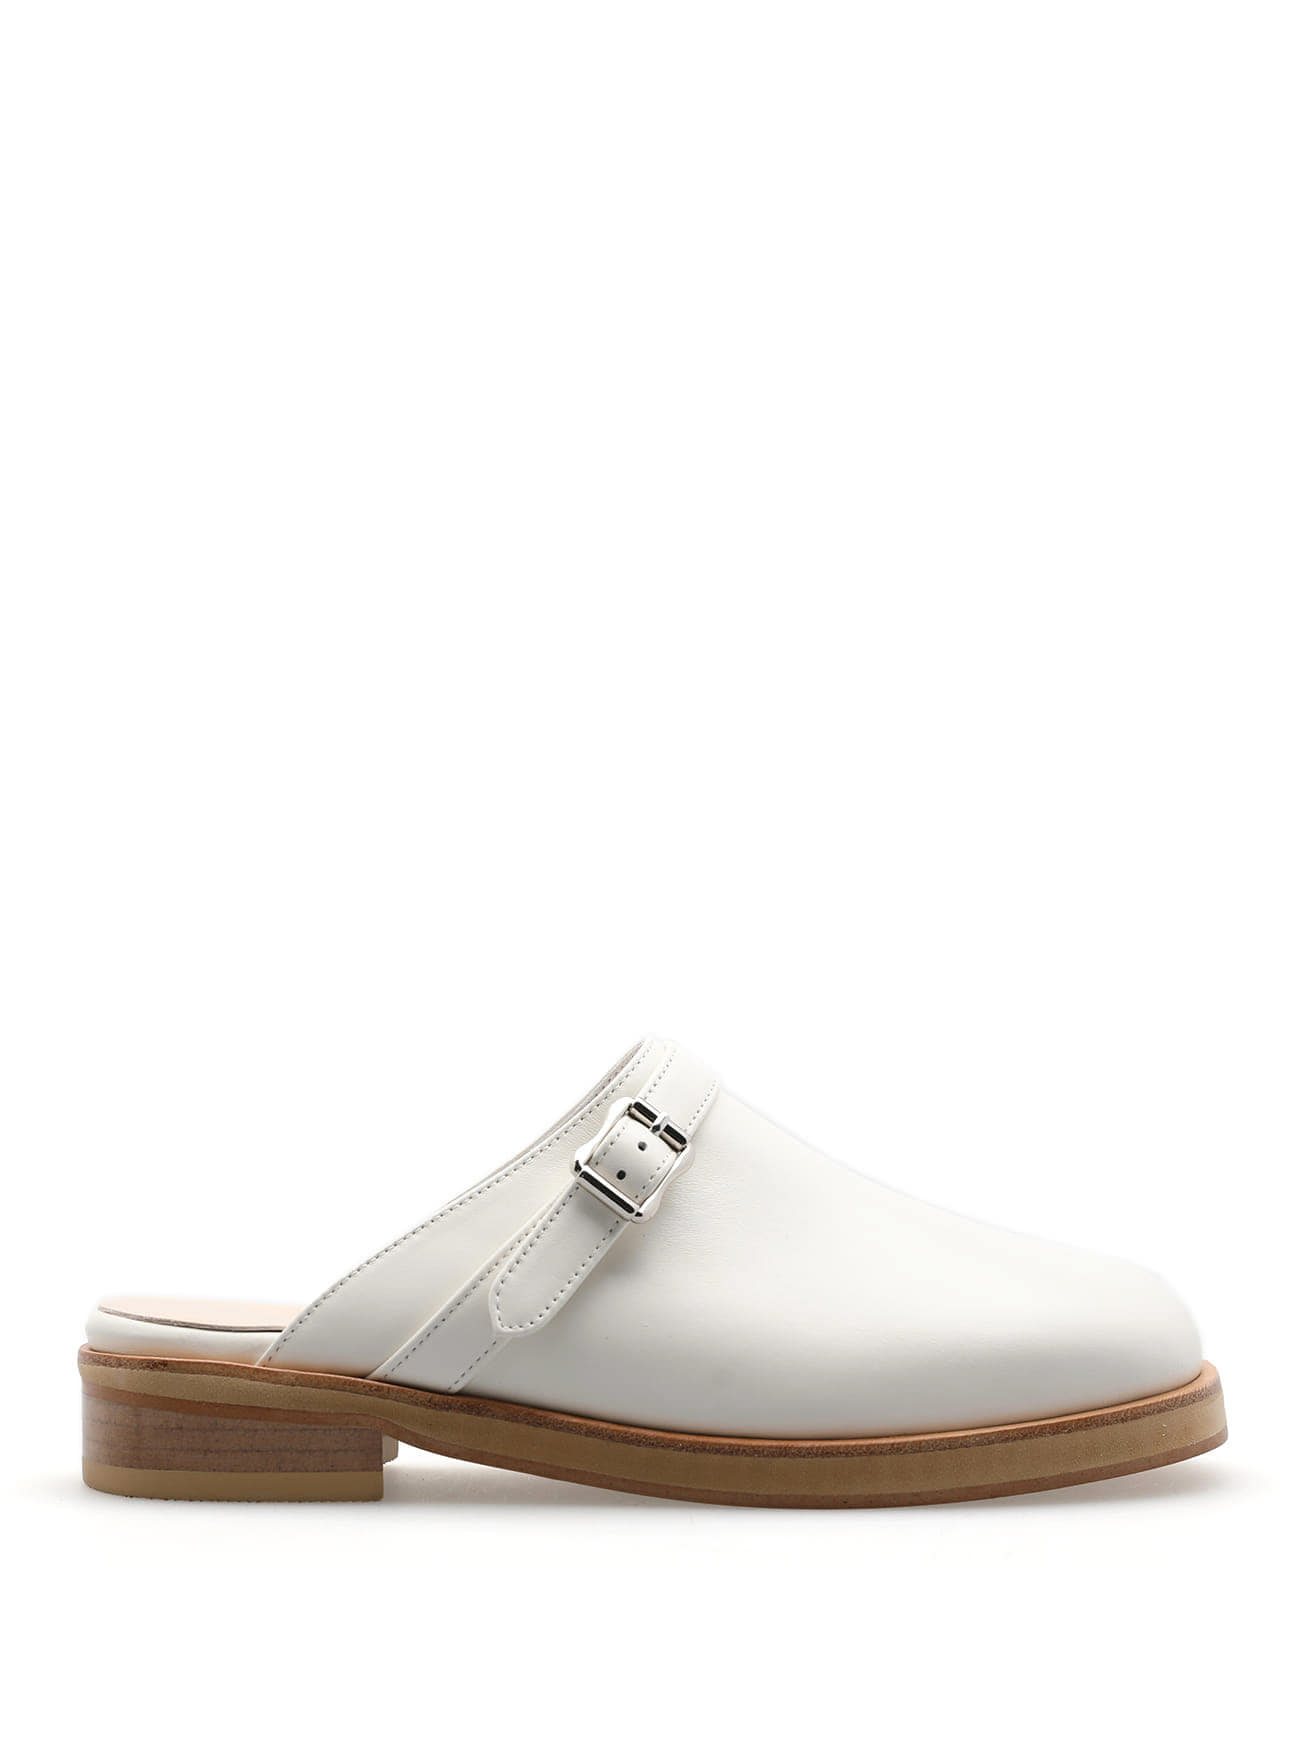 BUCKLE LEATHER CLOG MULES - IVORY